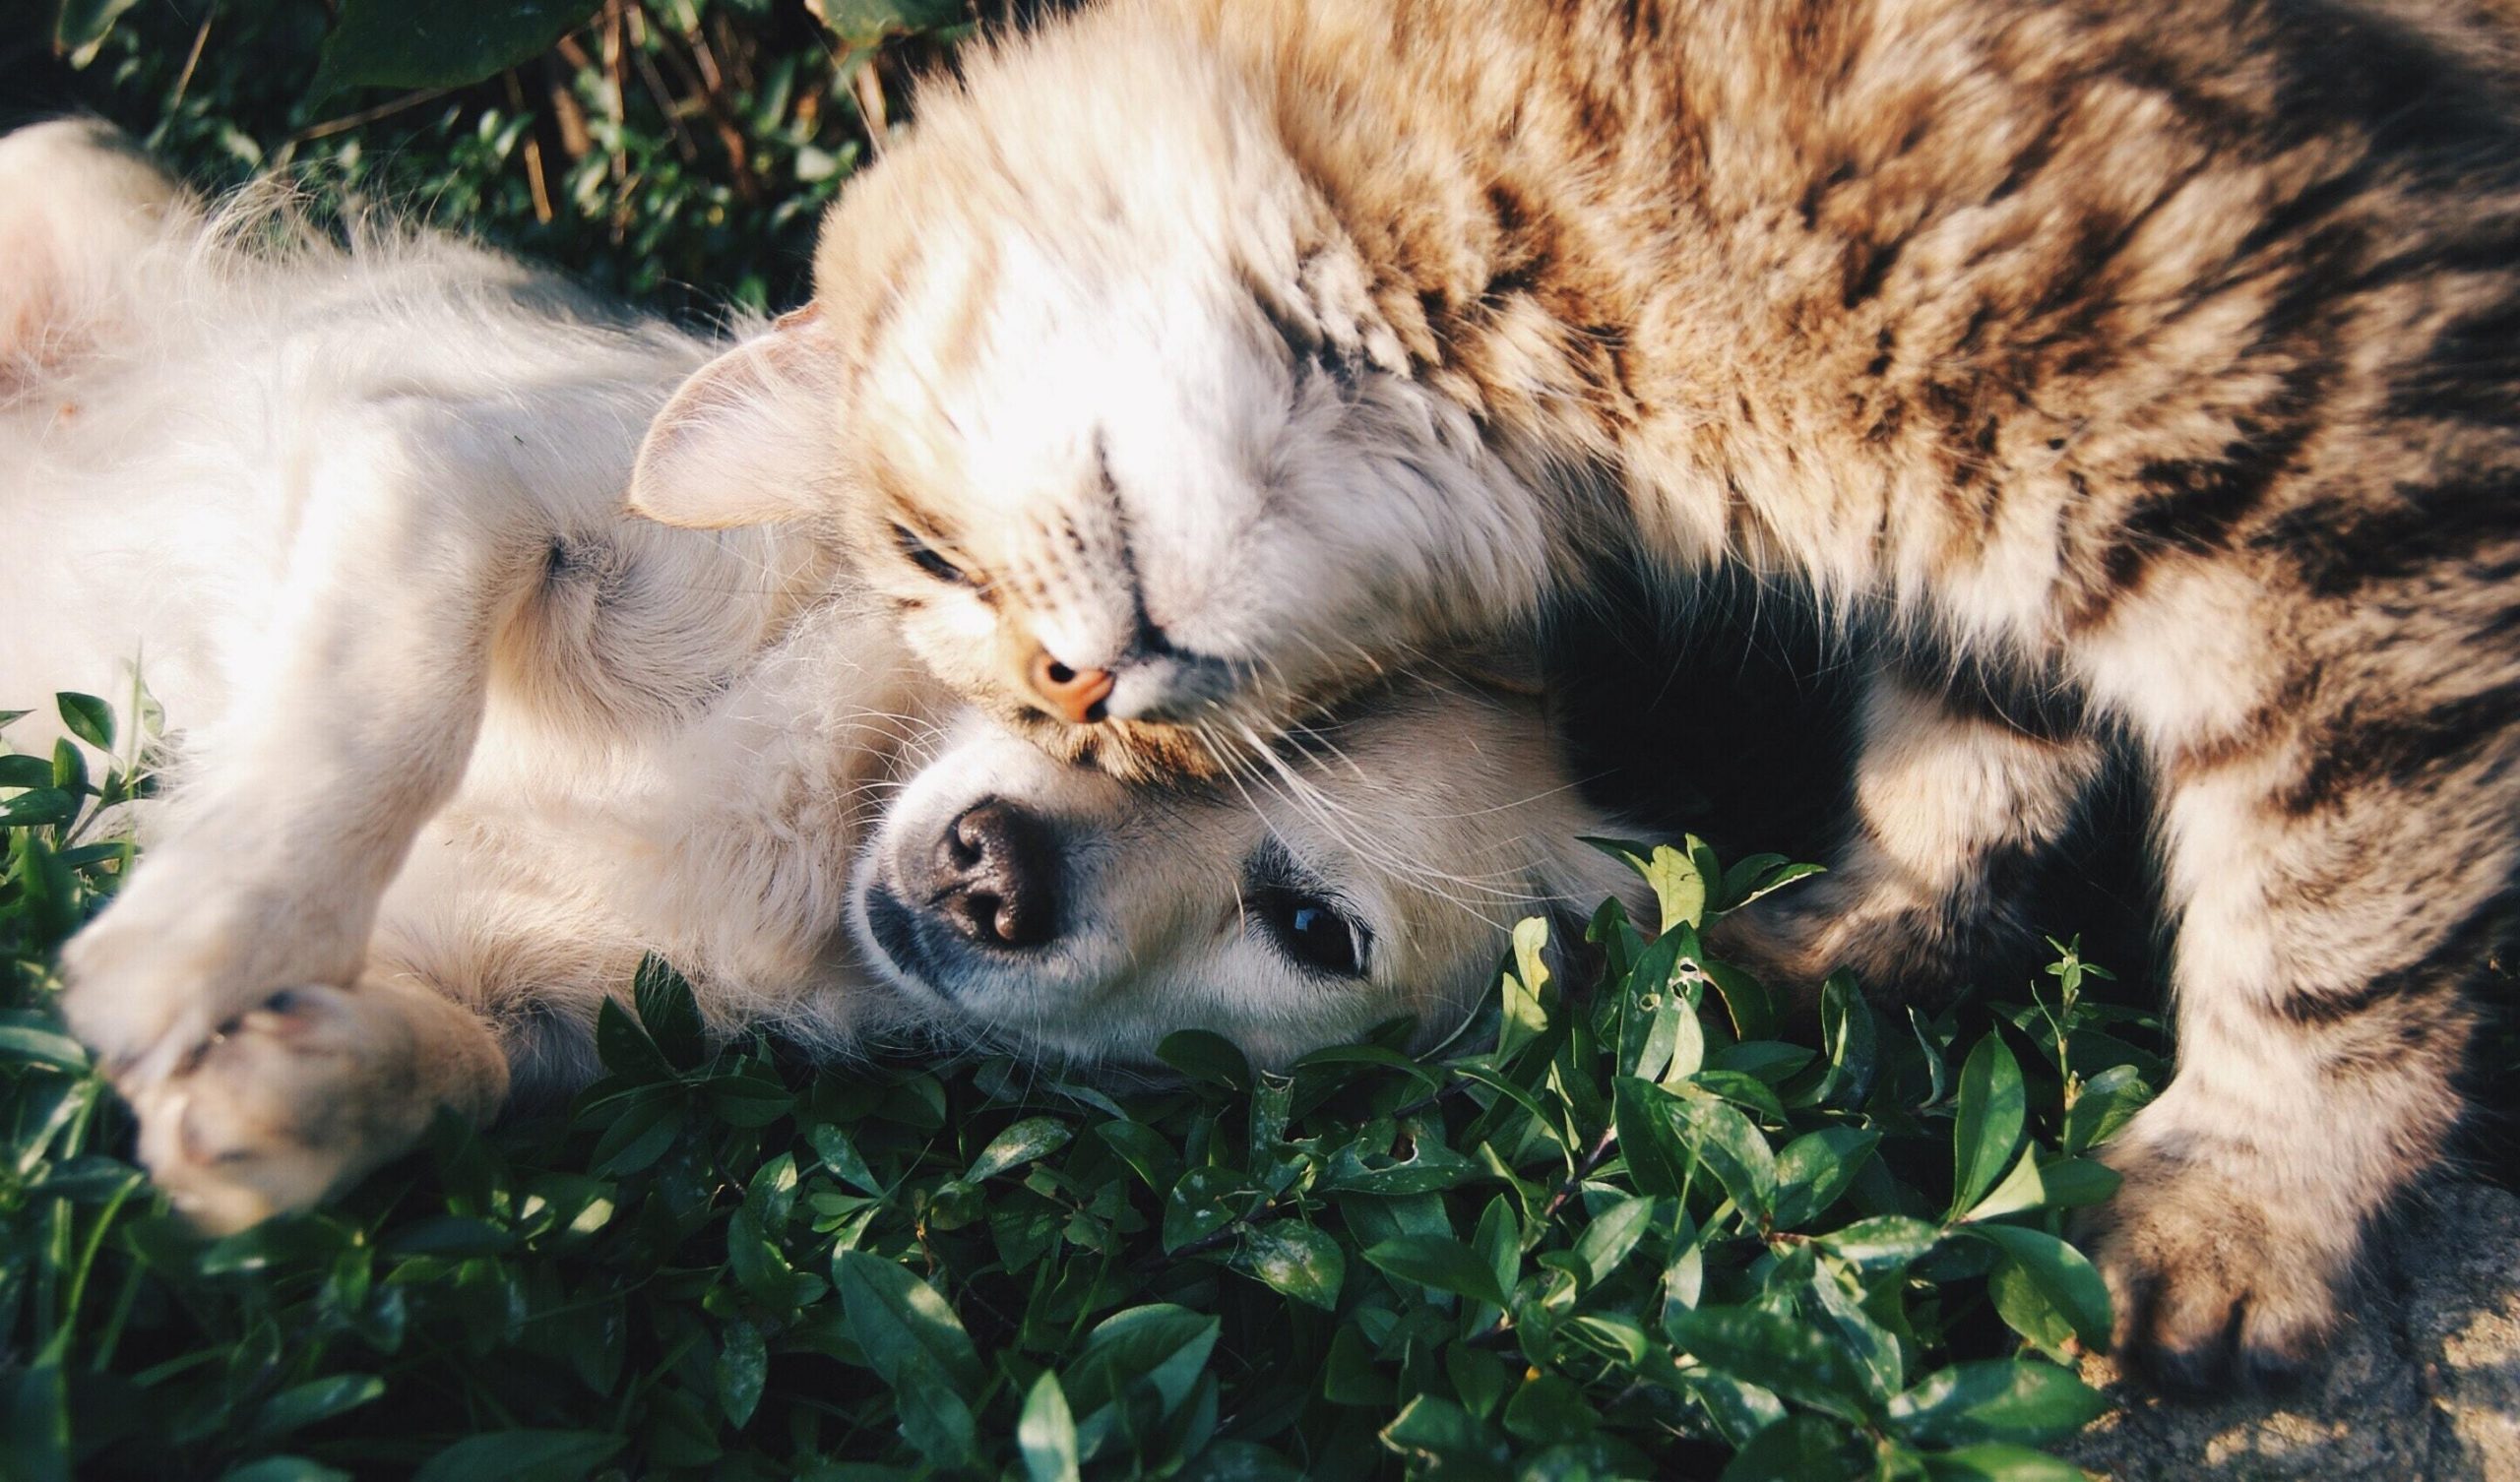 Celebrate National Cat DNA Day and National Dog Week with 20% off Wisdom Panel’s cat and dog DNA tests